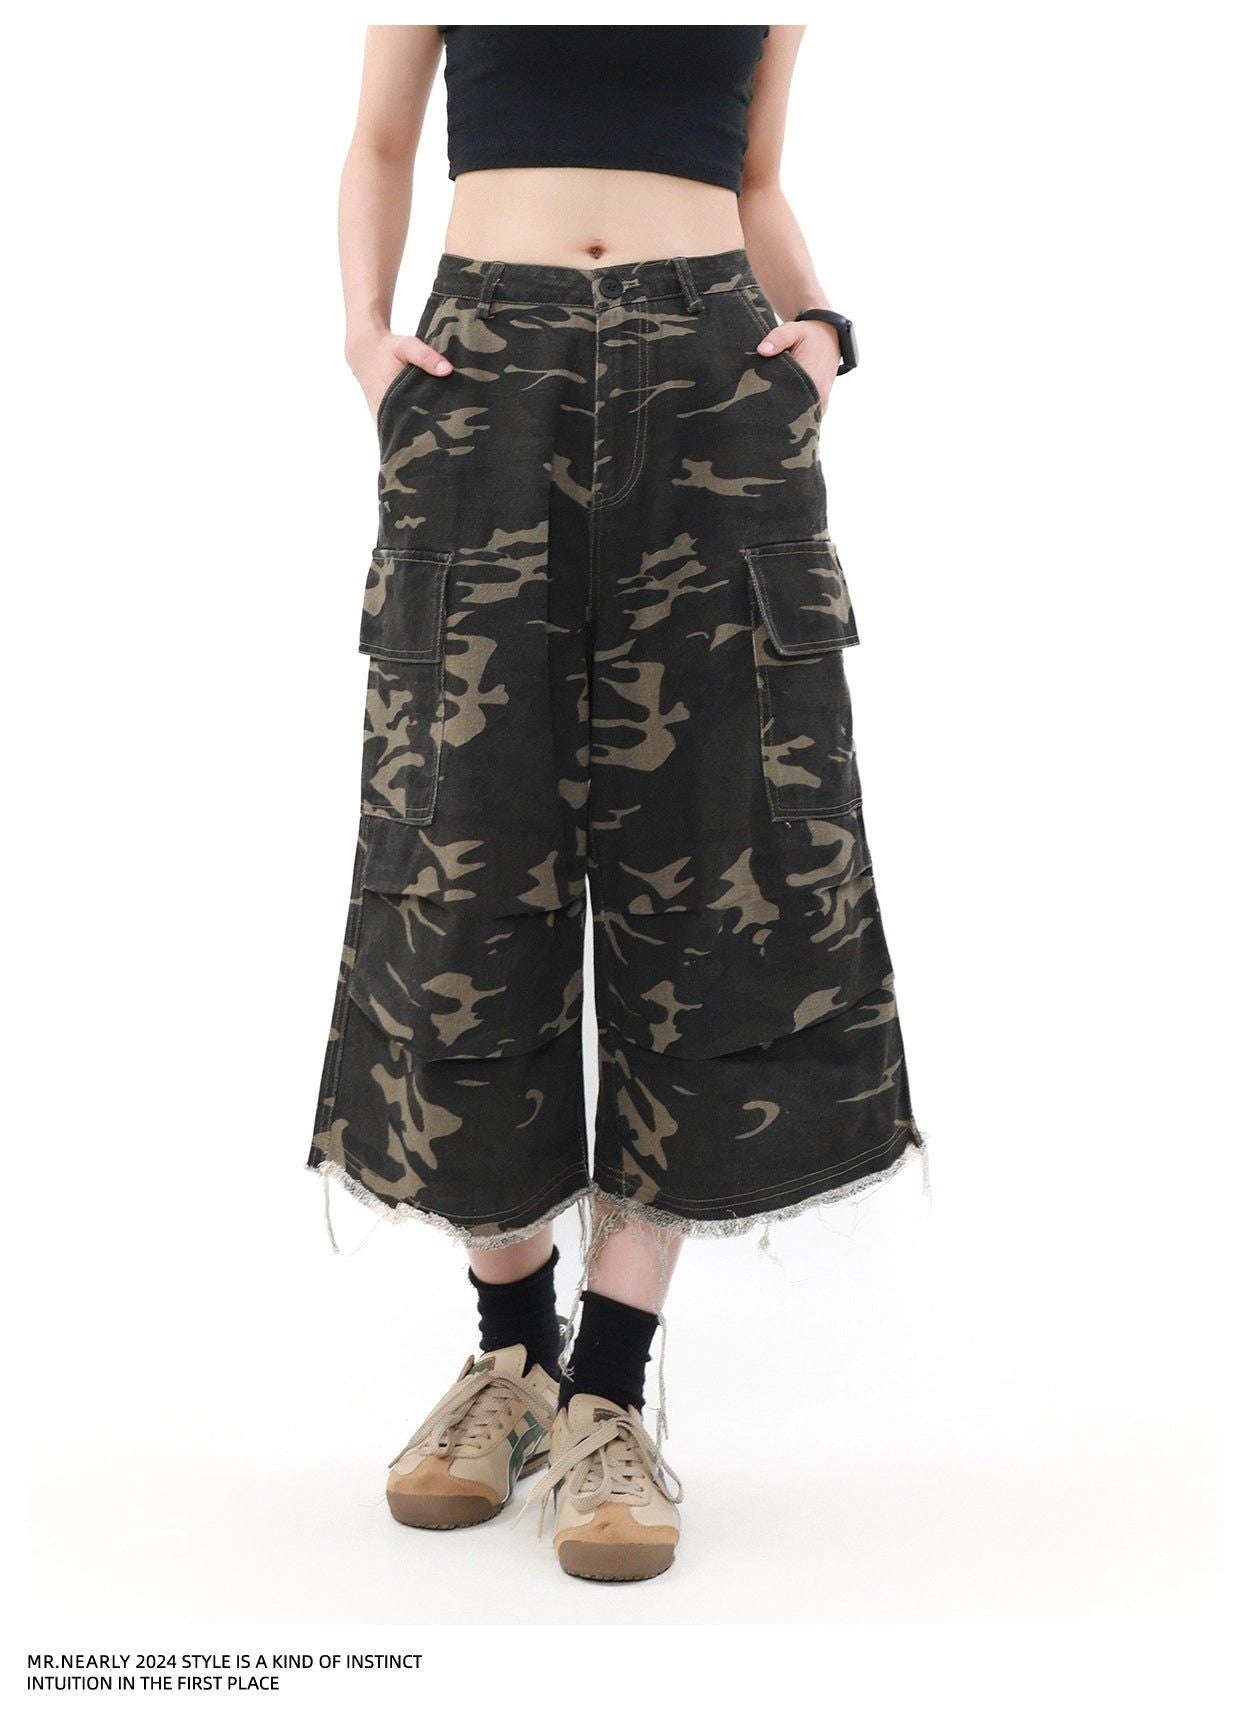 Camo Pleats Cargo Shorts Korean Street Fashion Shorts By Mr Nearly Shop Online at OH Vault